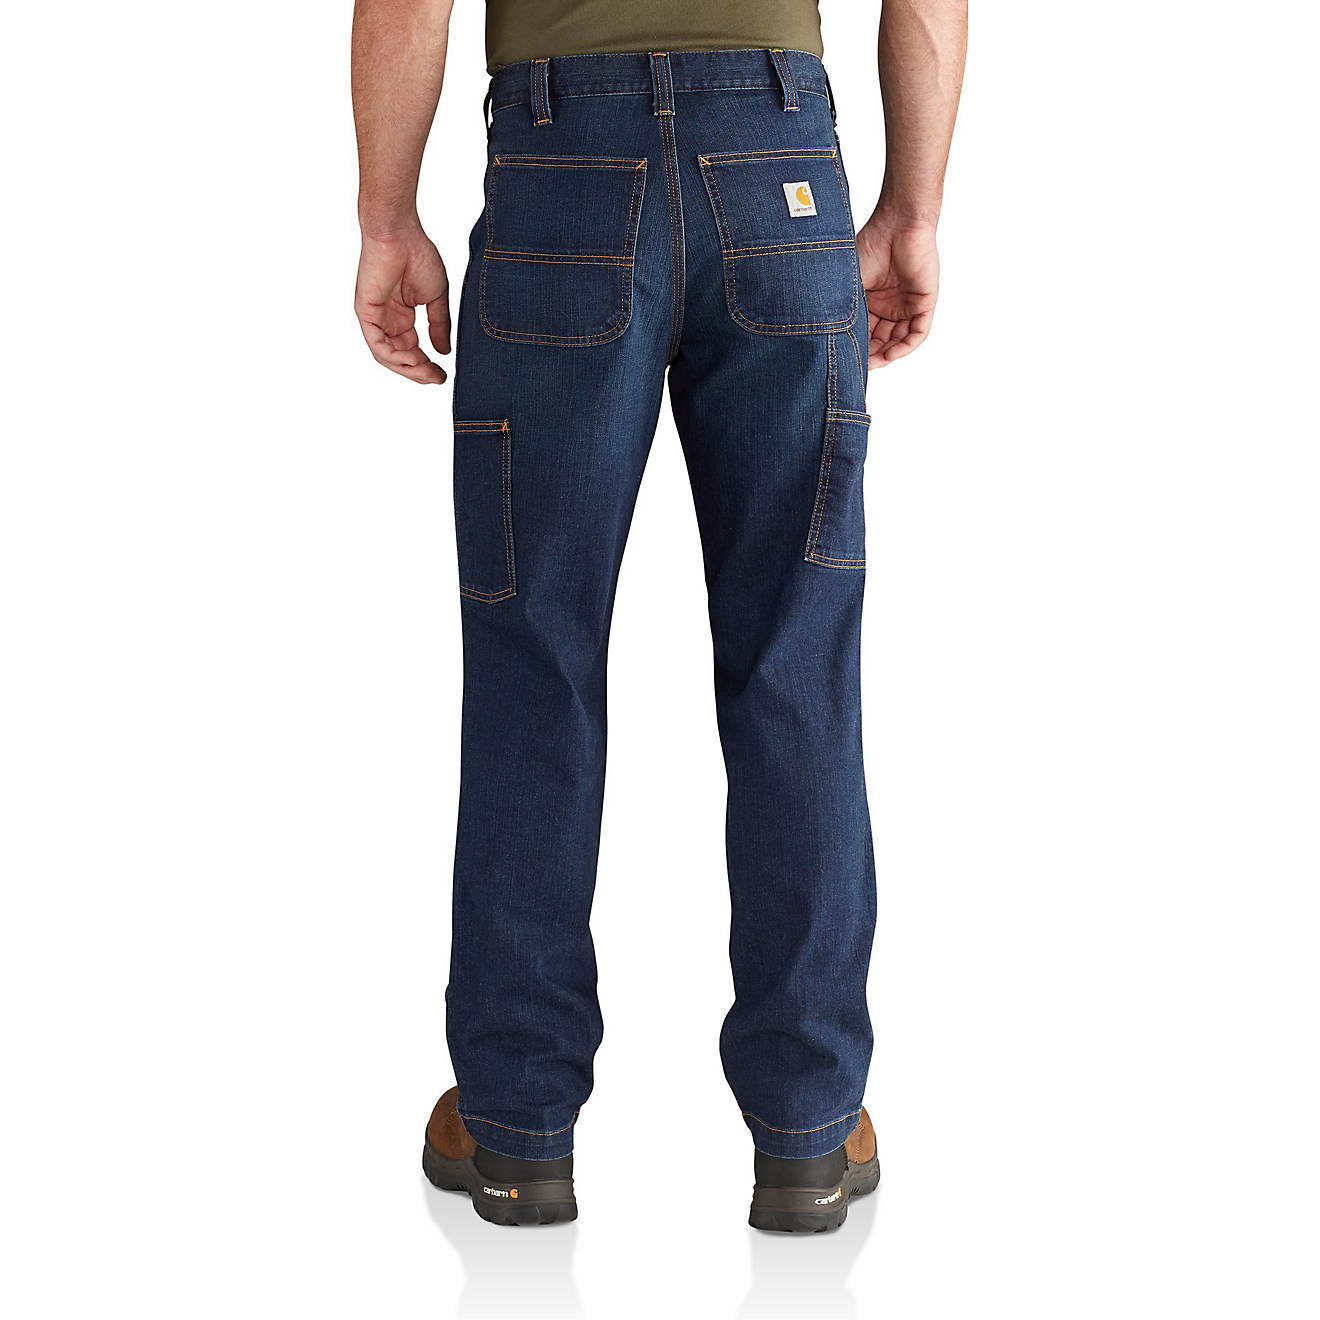 Carhartt Men's Rugged Flex Relaxed Fit Dungaree Jeans | Academy